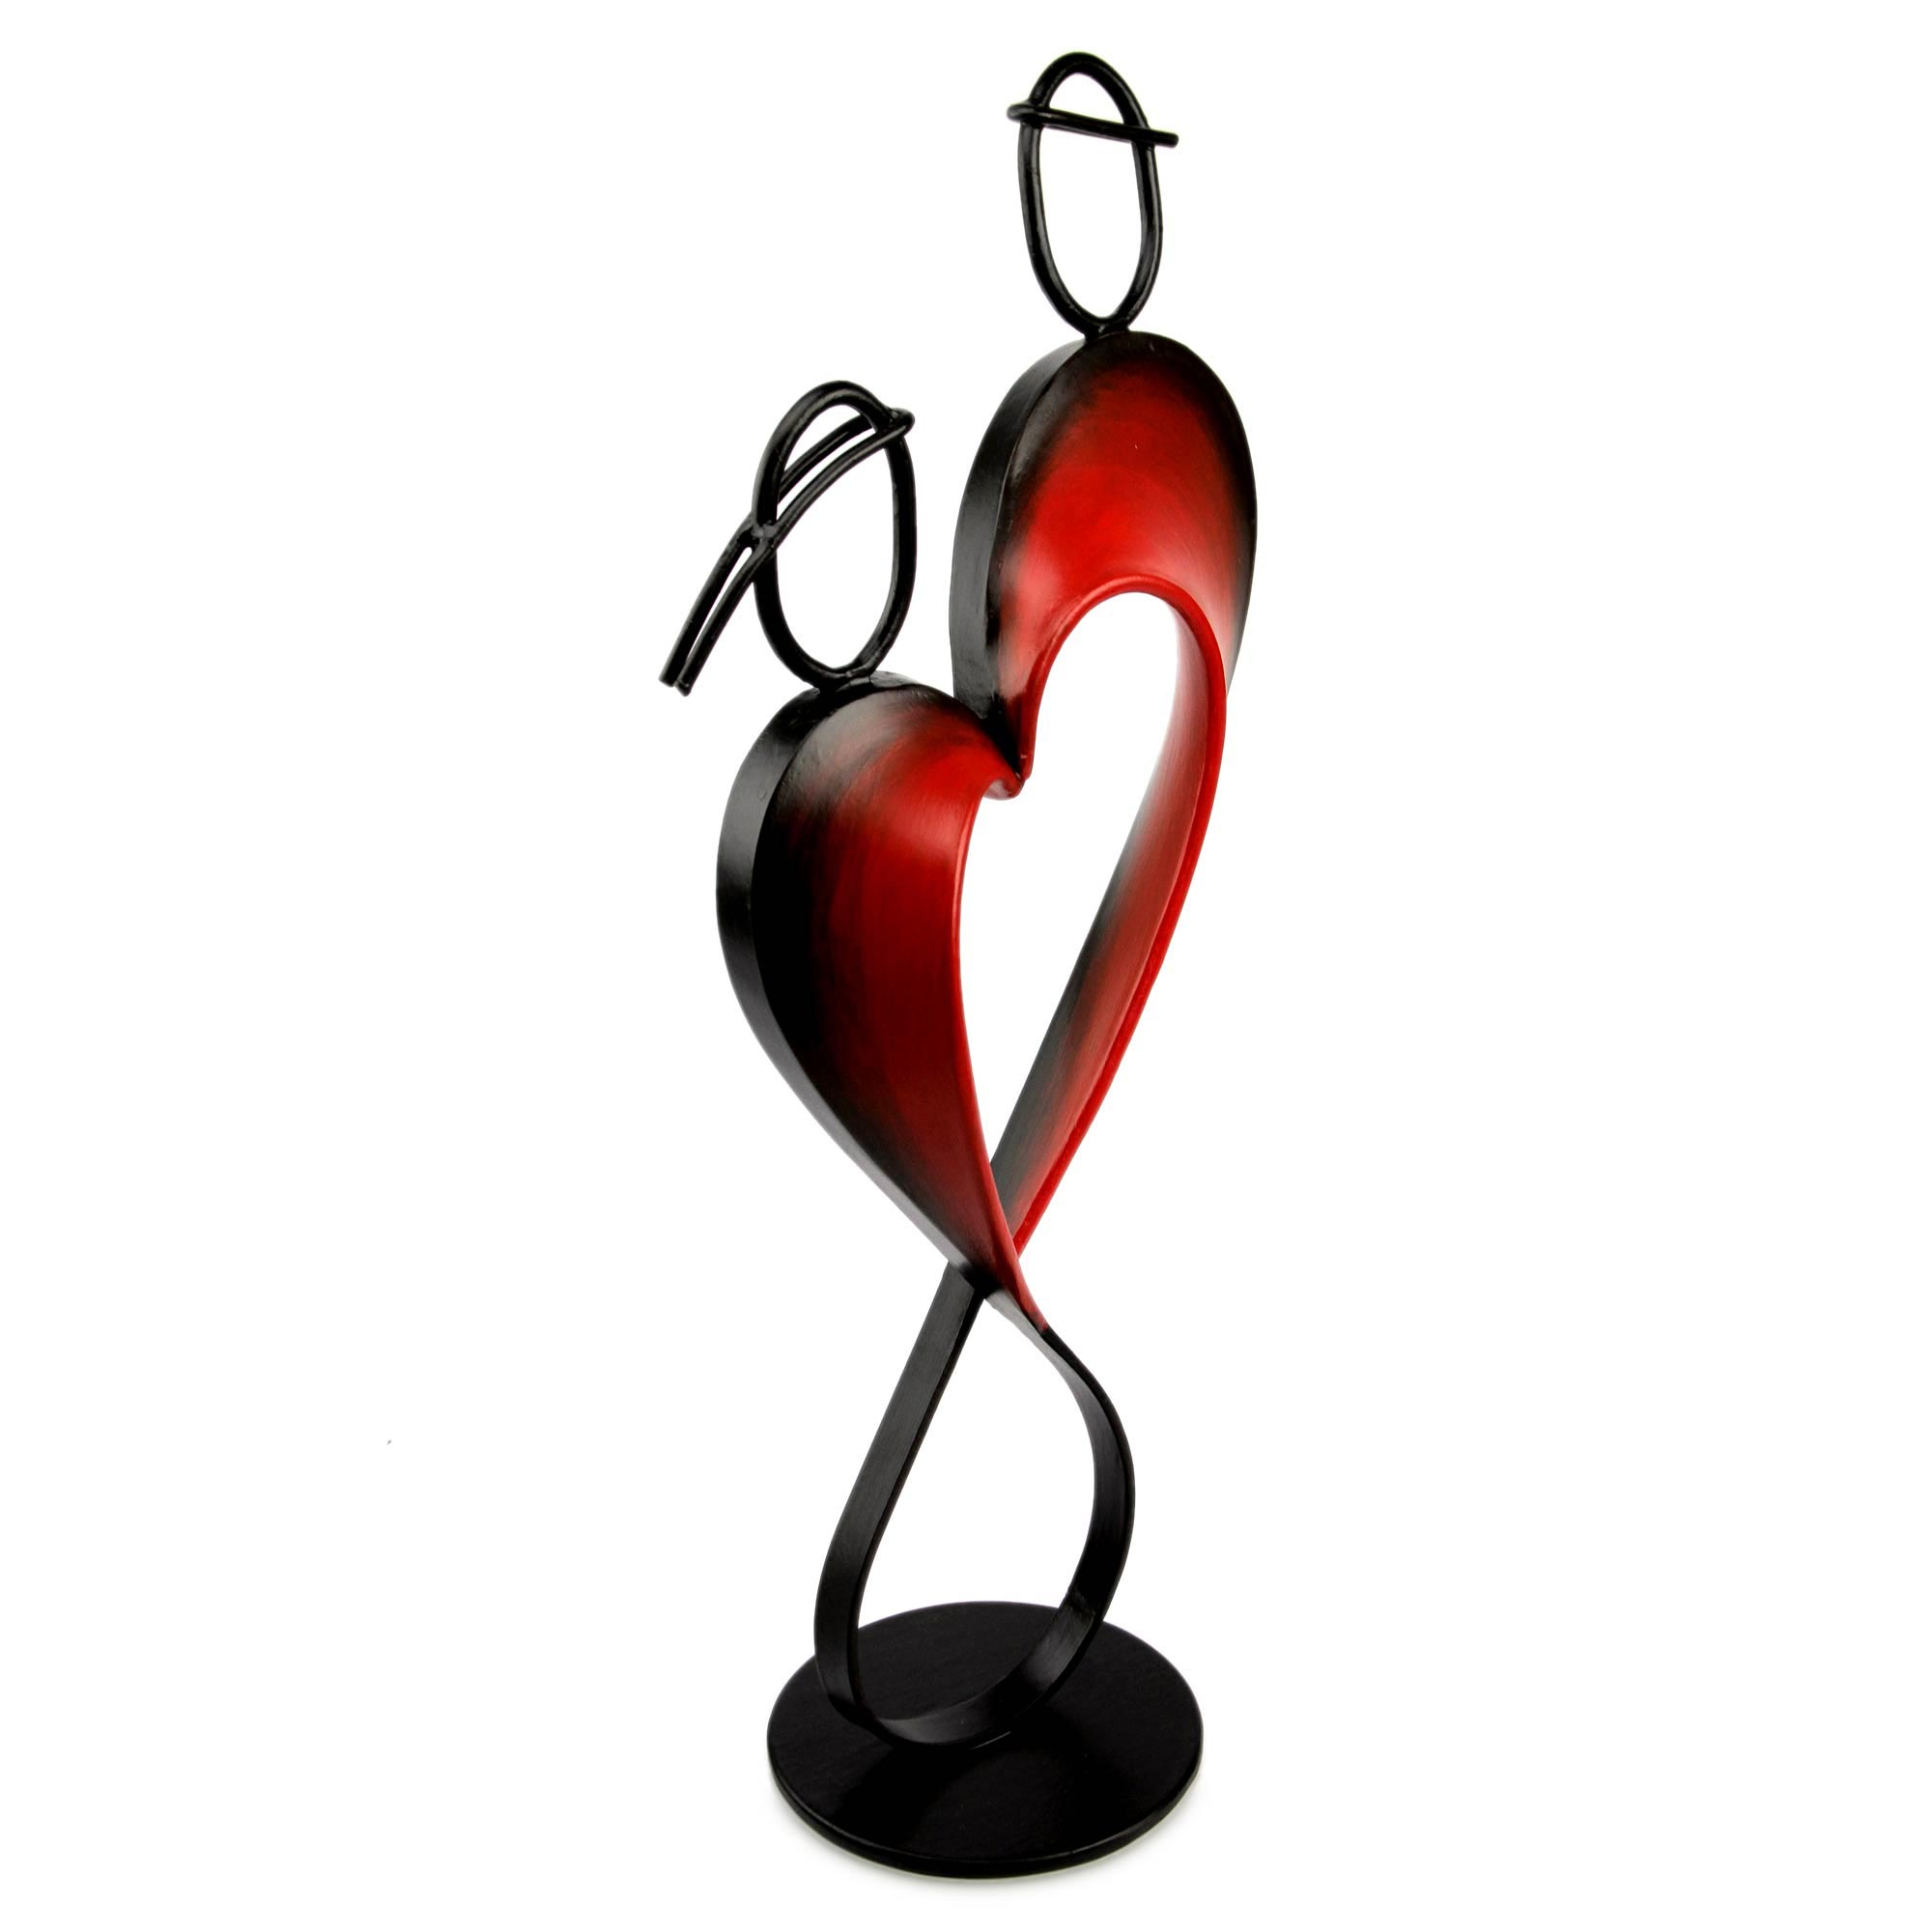 UNICEF Market | Handcrafted Metal Sculpture from Peru - Heart and Soul ...